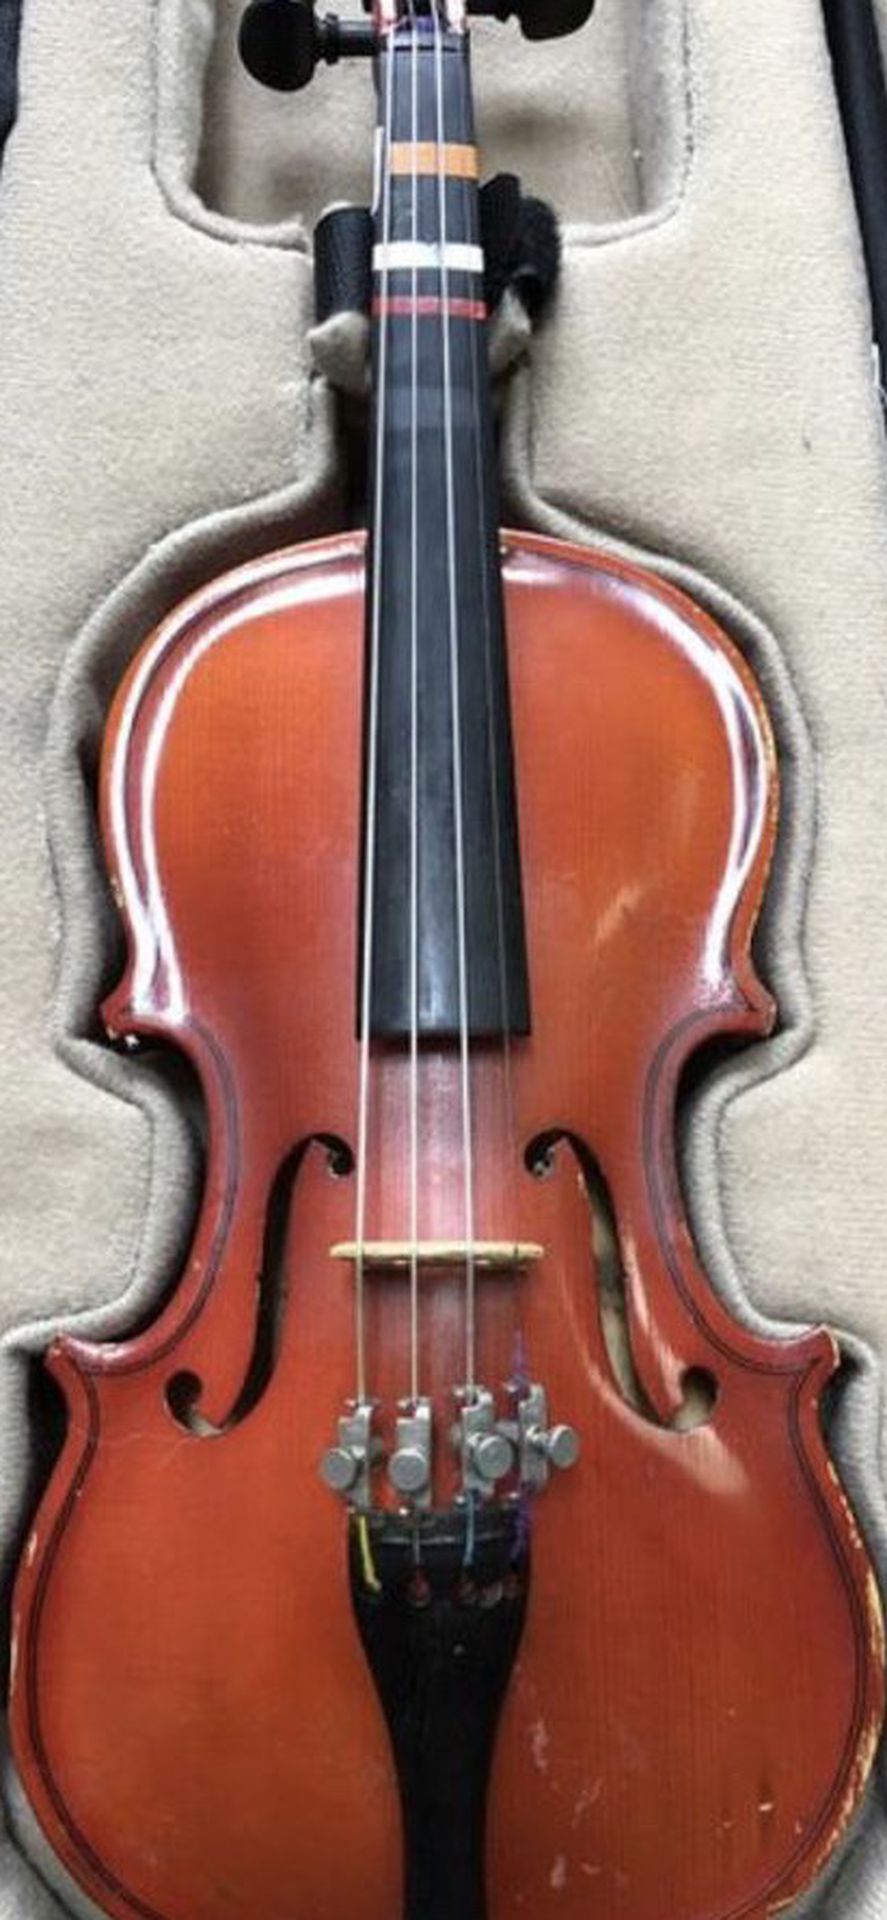 1/10 Violin (very good tone, equipped with newer strings, just need a bow)